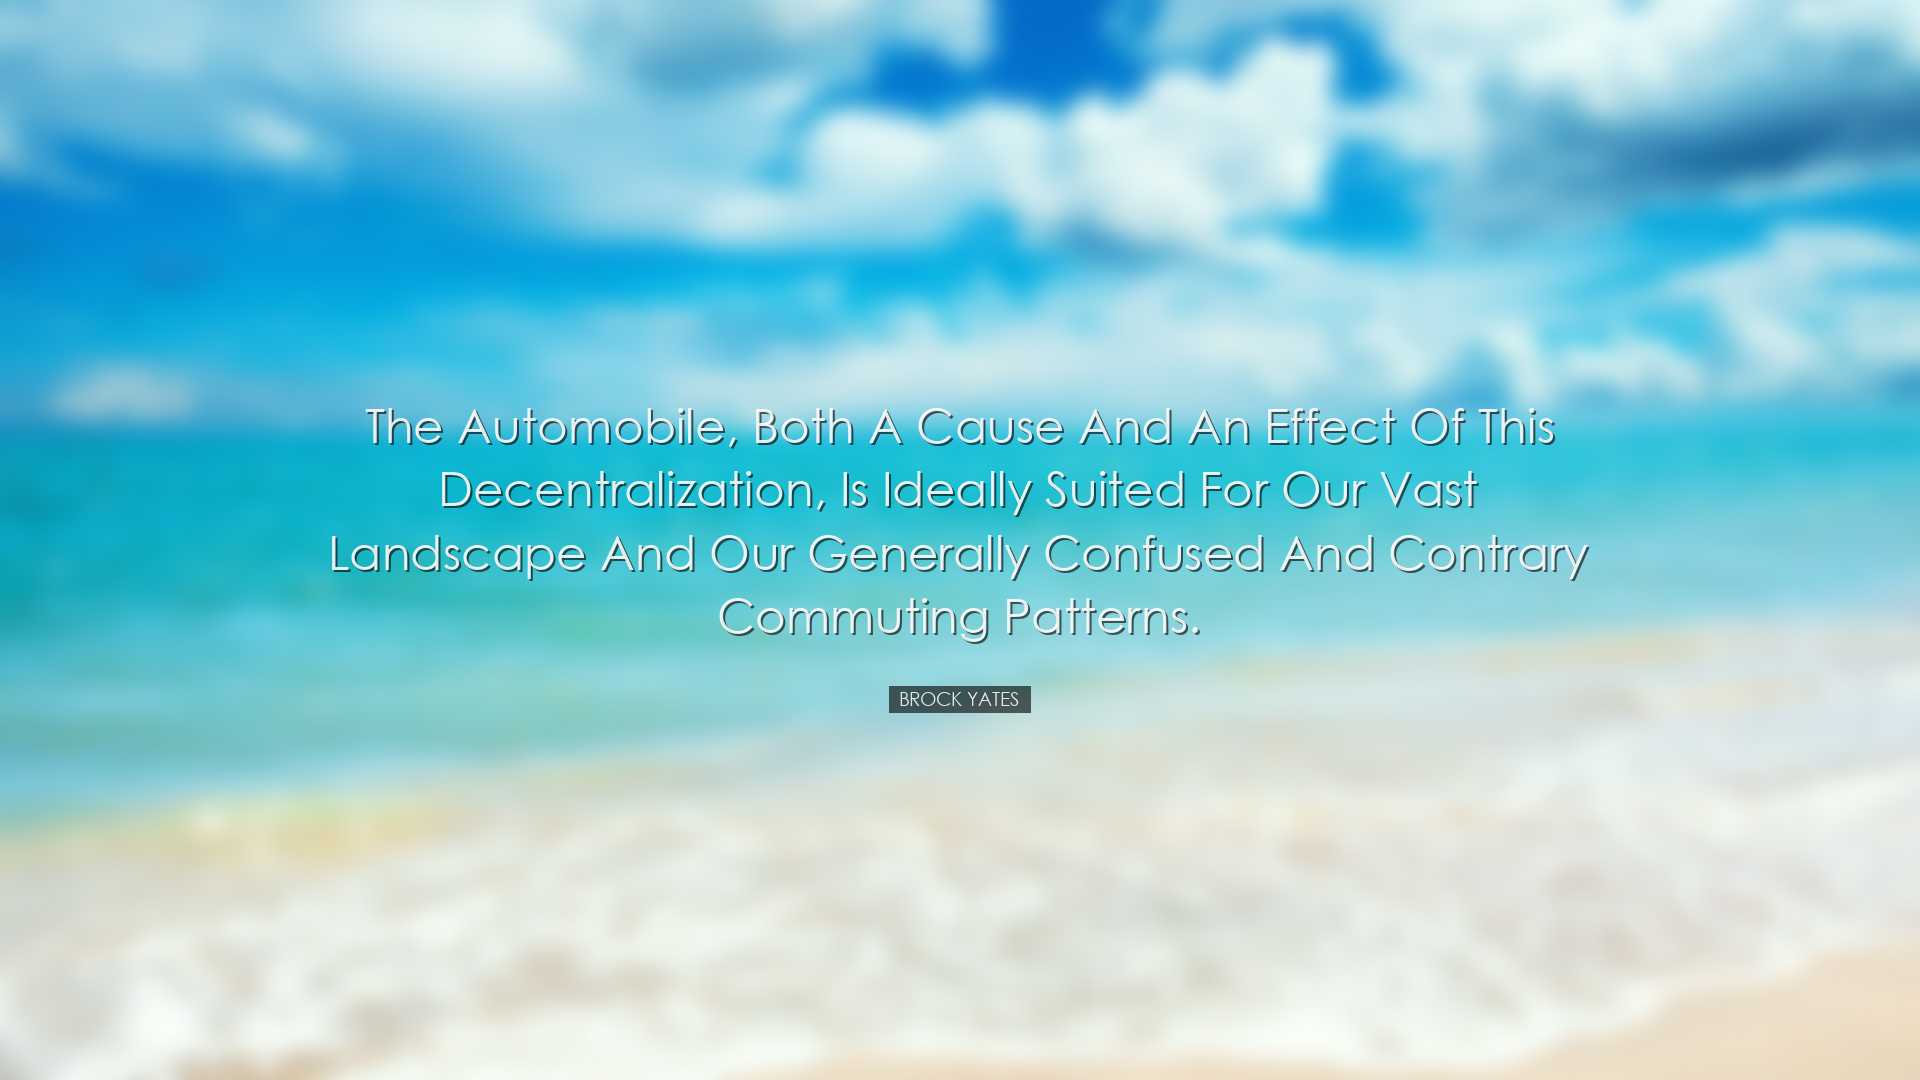 The automobile, both a cause and an effect of this decentralizatio